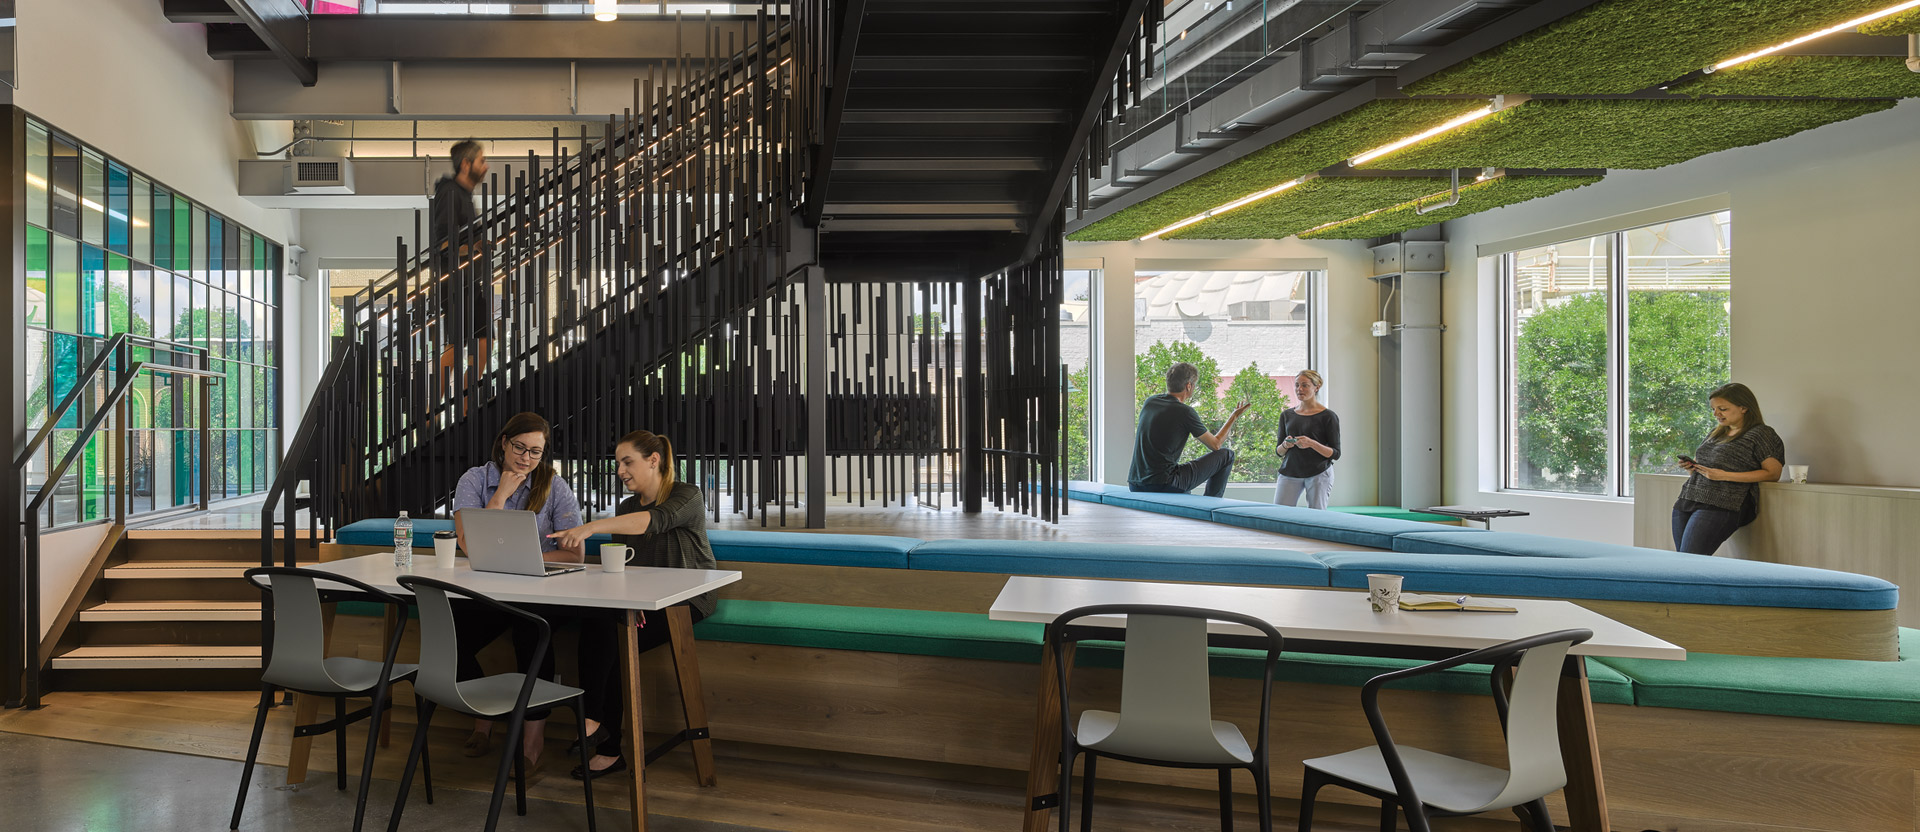 Contemporary open-plan office space featuring a mix of industrial and biophilic design elements with exposed ceiling pipes, cascading greenery, and central tiered seating area fostering collaboration.